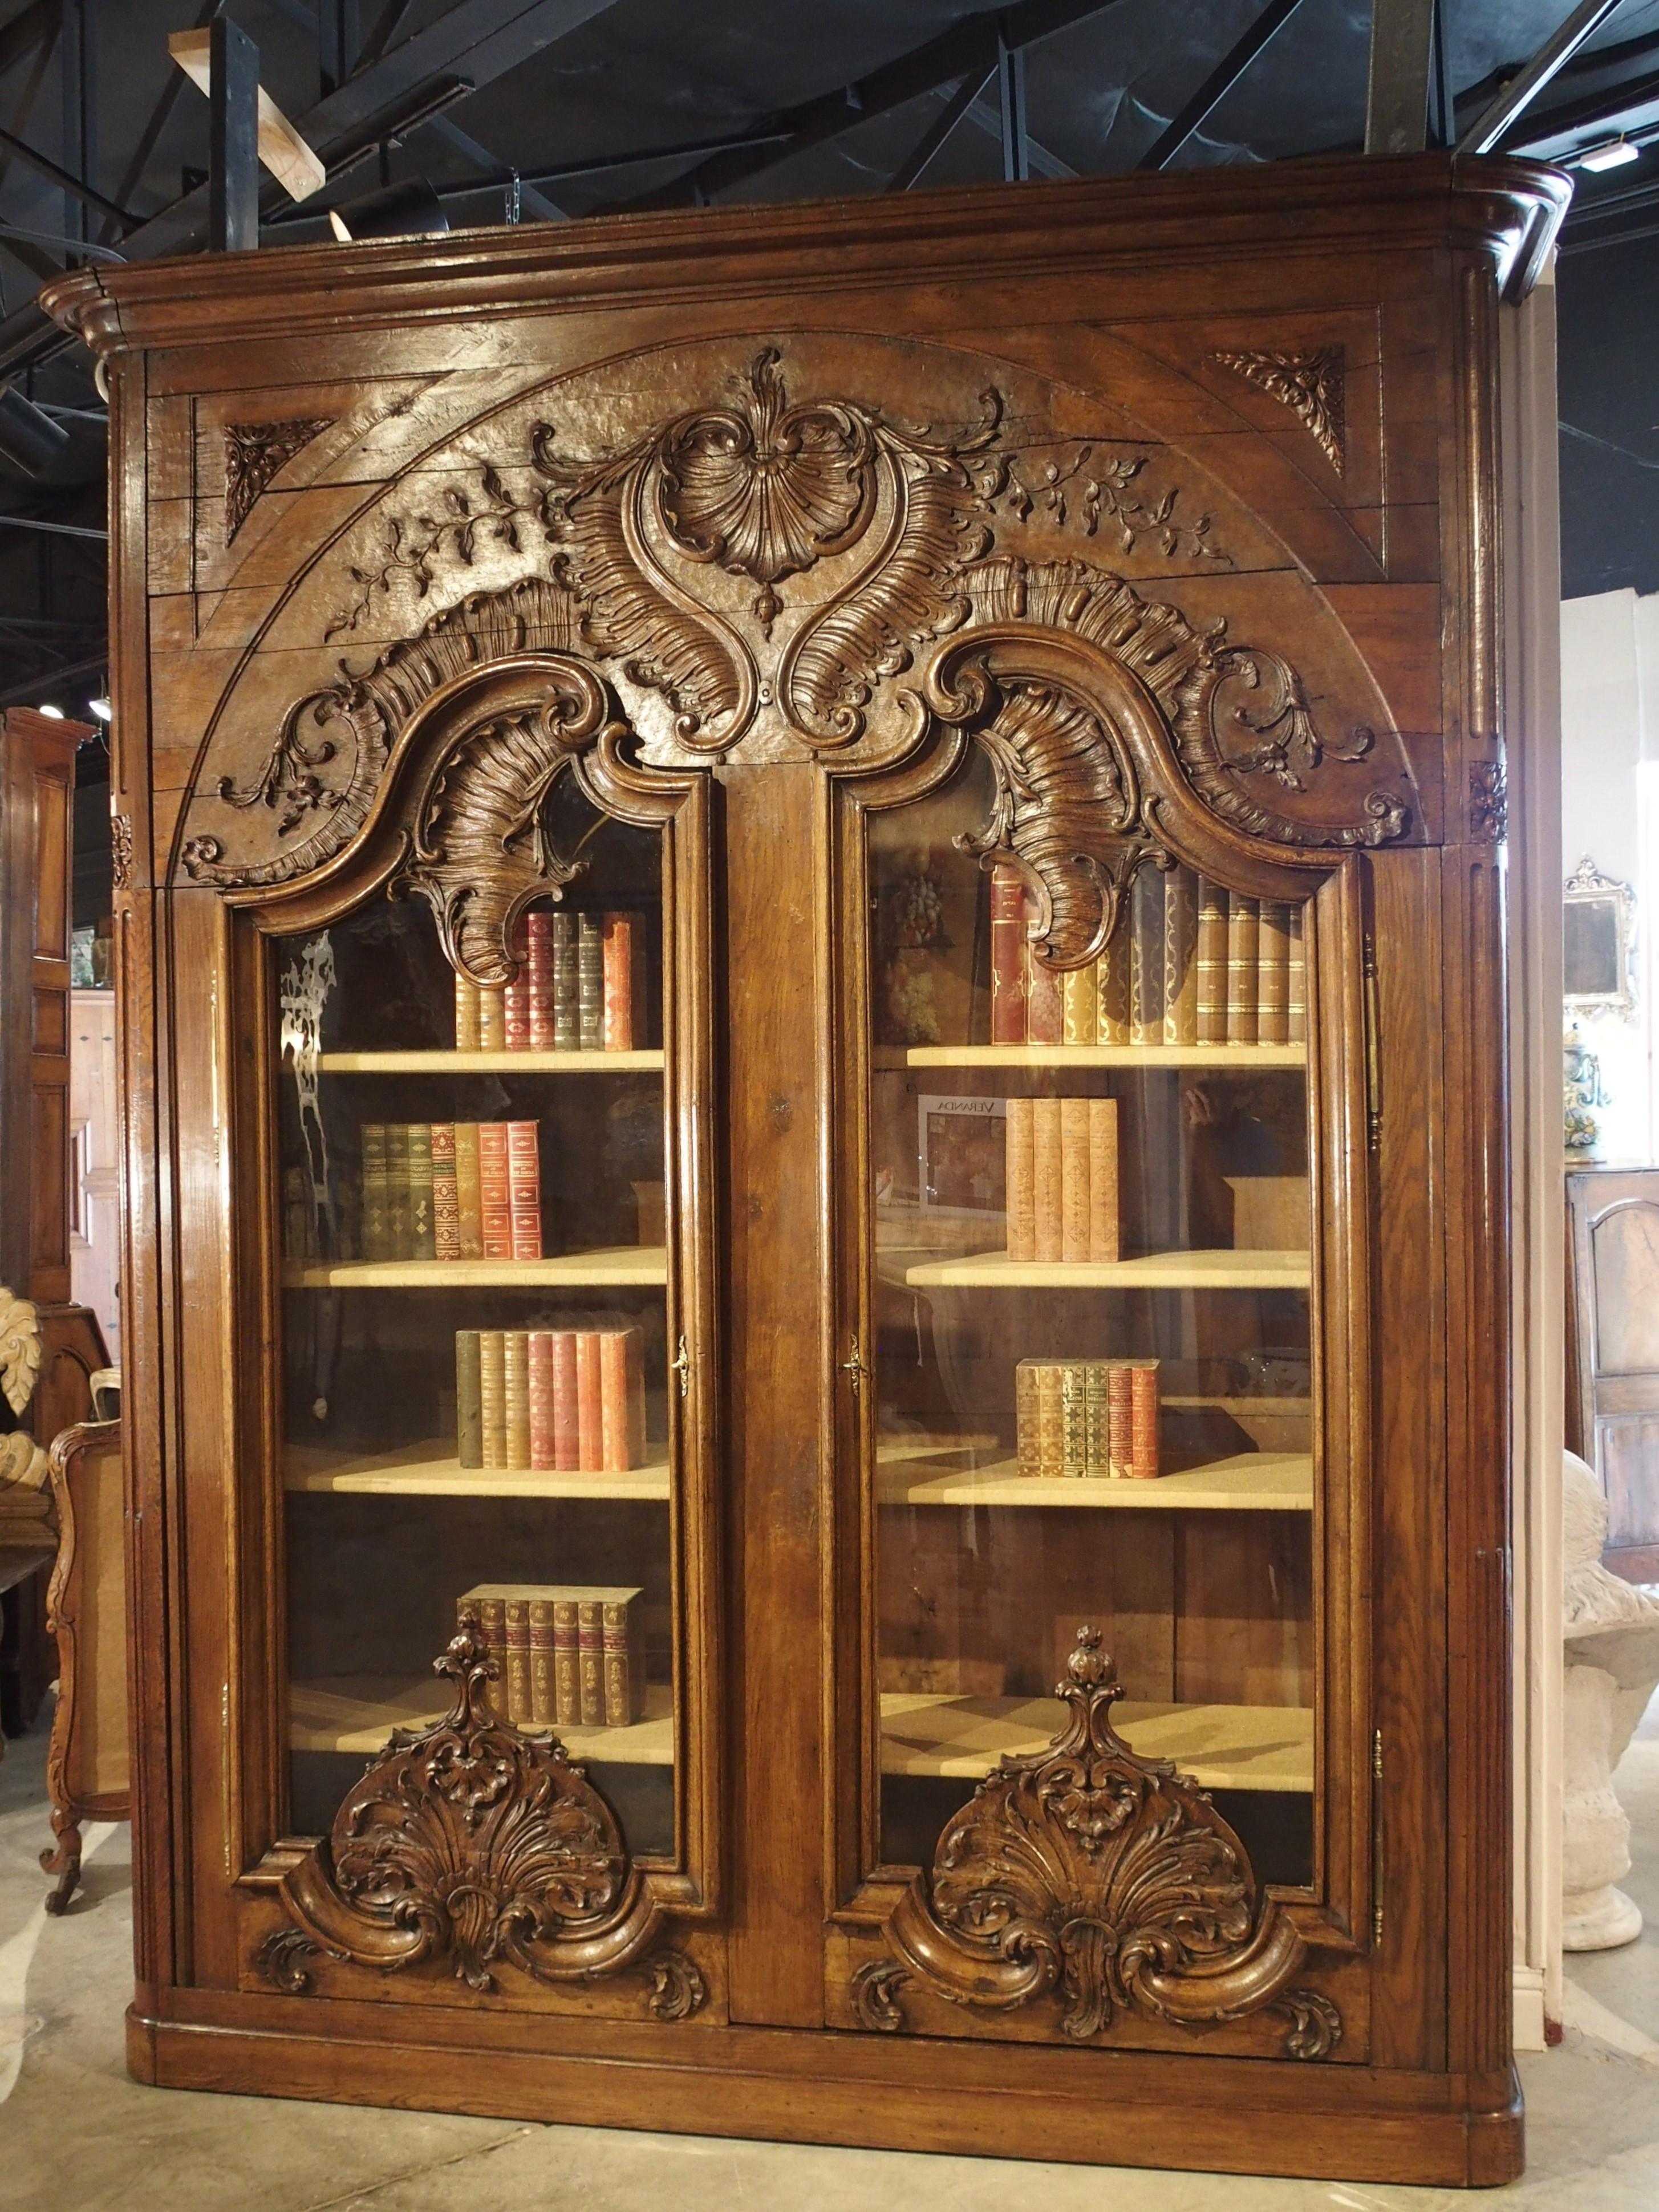 This incredibly unique French bibliotheque is made from carved Oak and dates to the 1800s. Measuring exactly 9 1/2 feet tall and 92 inches wide and boasting some intricately carved woodwork, this piece makes a strong visual impact.

We have it